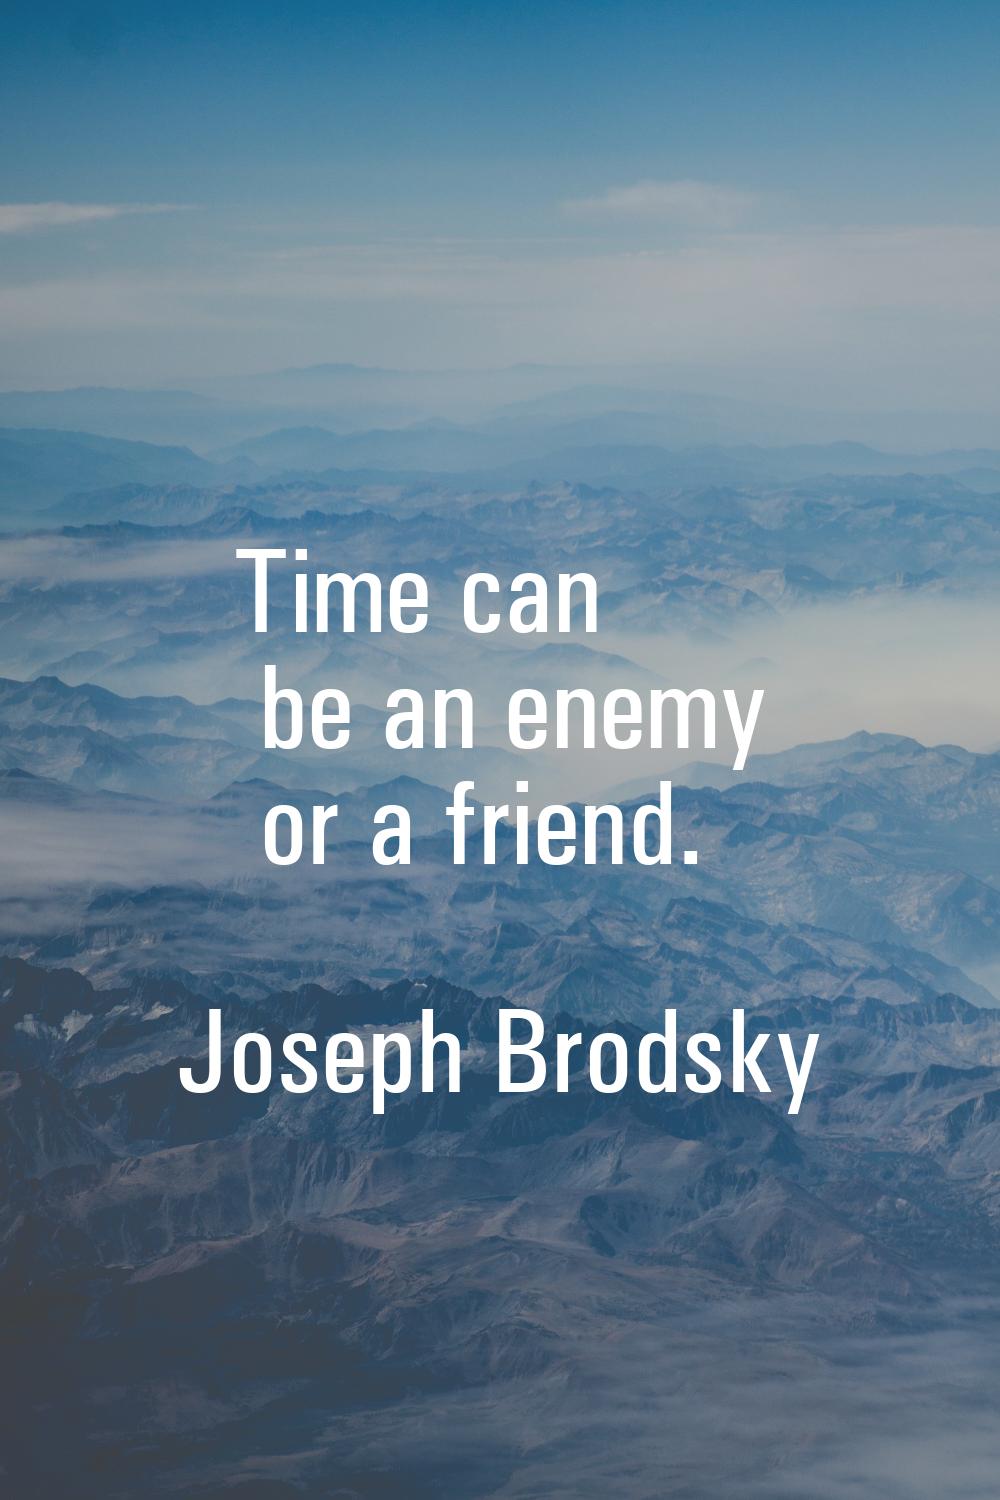 Time can be an enemy or a friend.